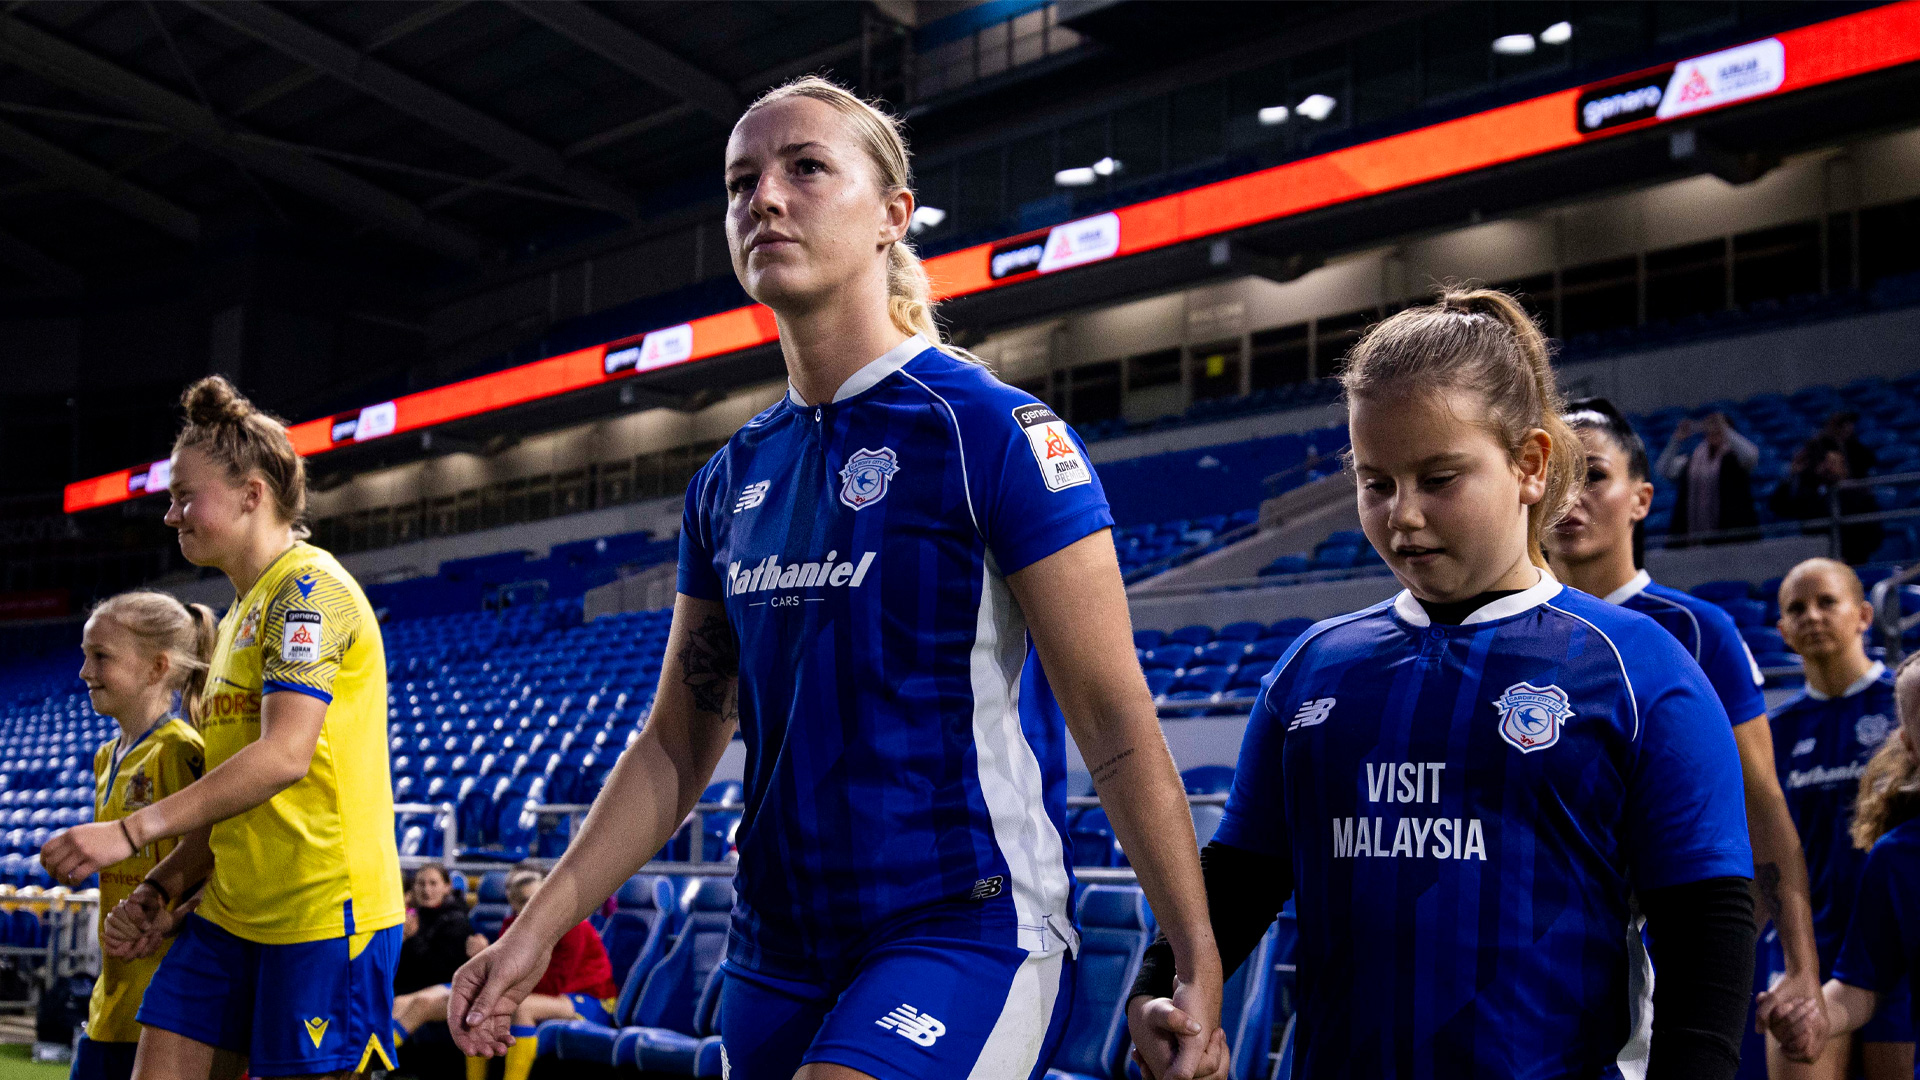 Danielle Green walks out onto the pitch at Cardiff City Stadium